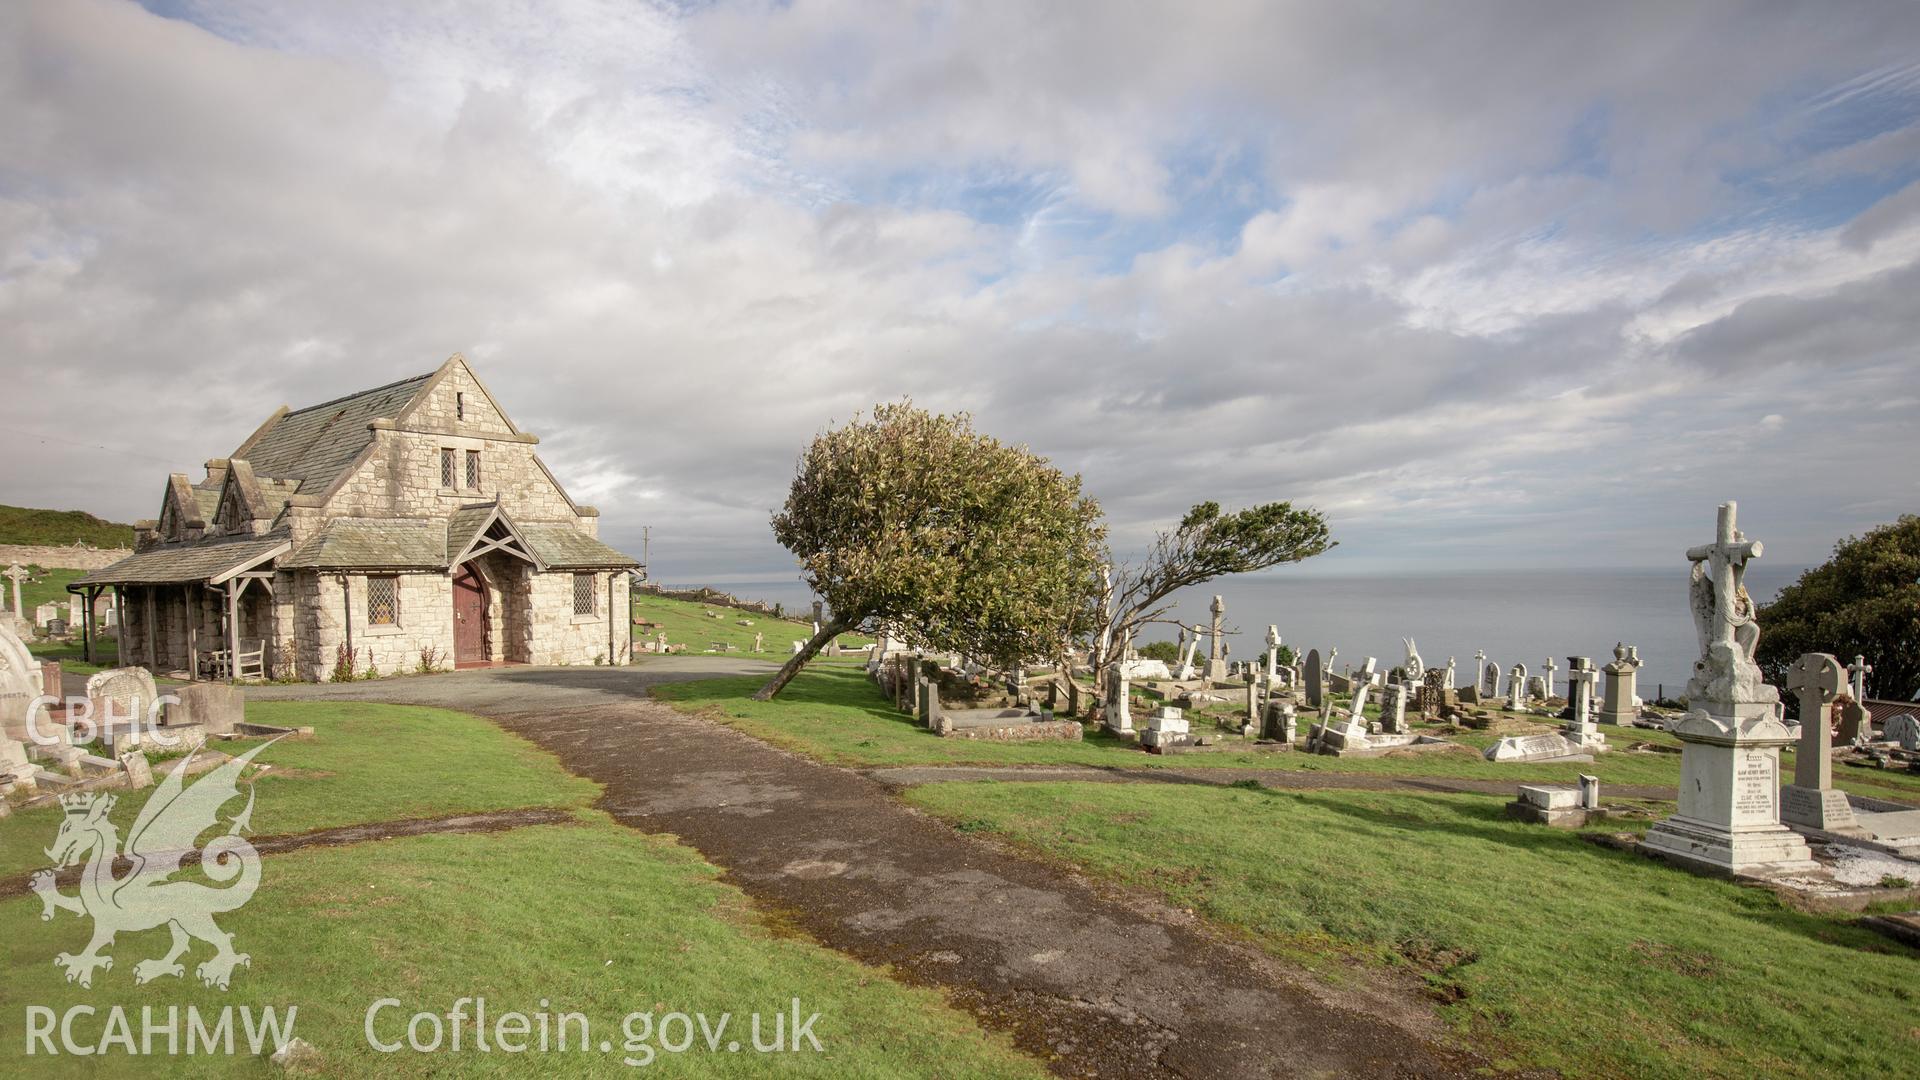 Colour photograph showing front elevation, side elevation and entrance of the Great Orme Cemetery chapel near St. Tudno's church, Llandudno. Photographed by Richard Barrett on 17th September 2018.